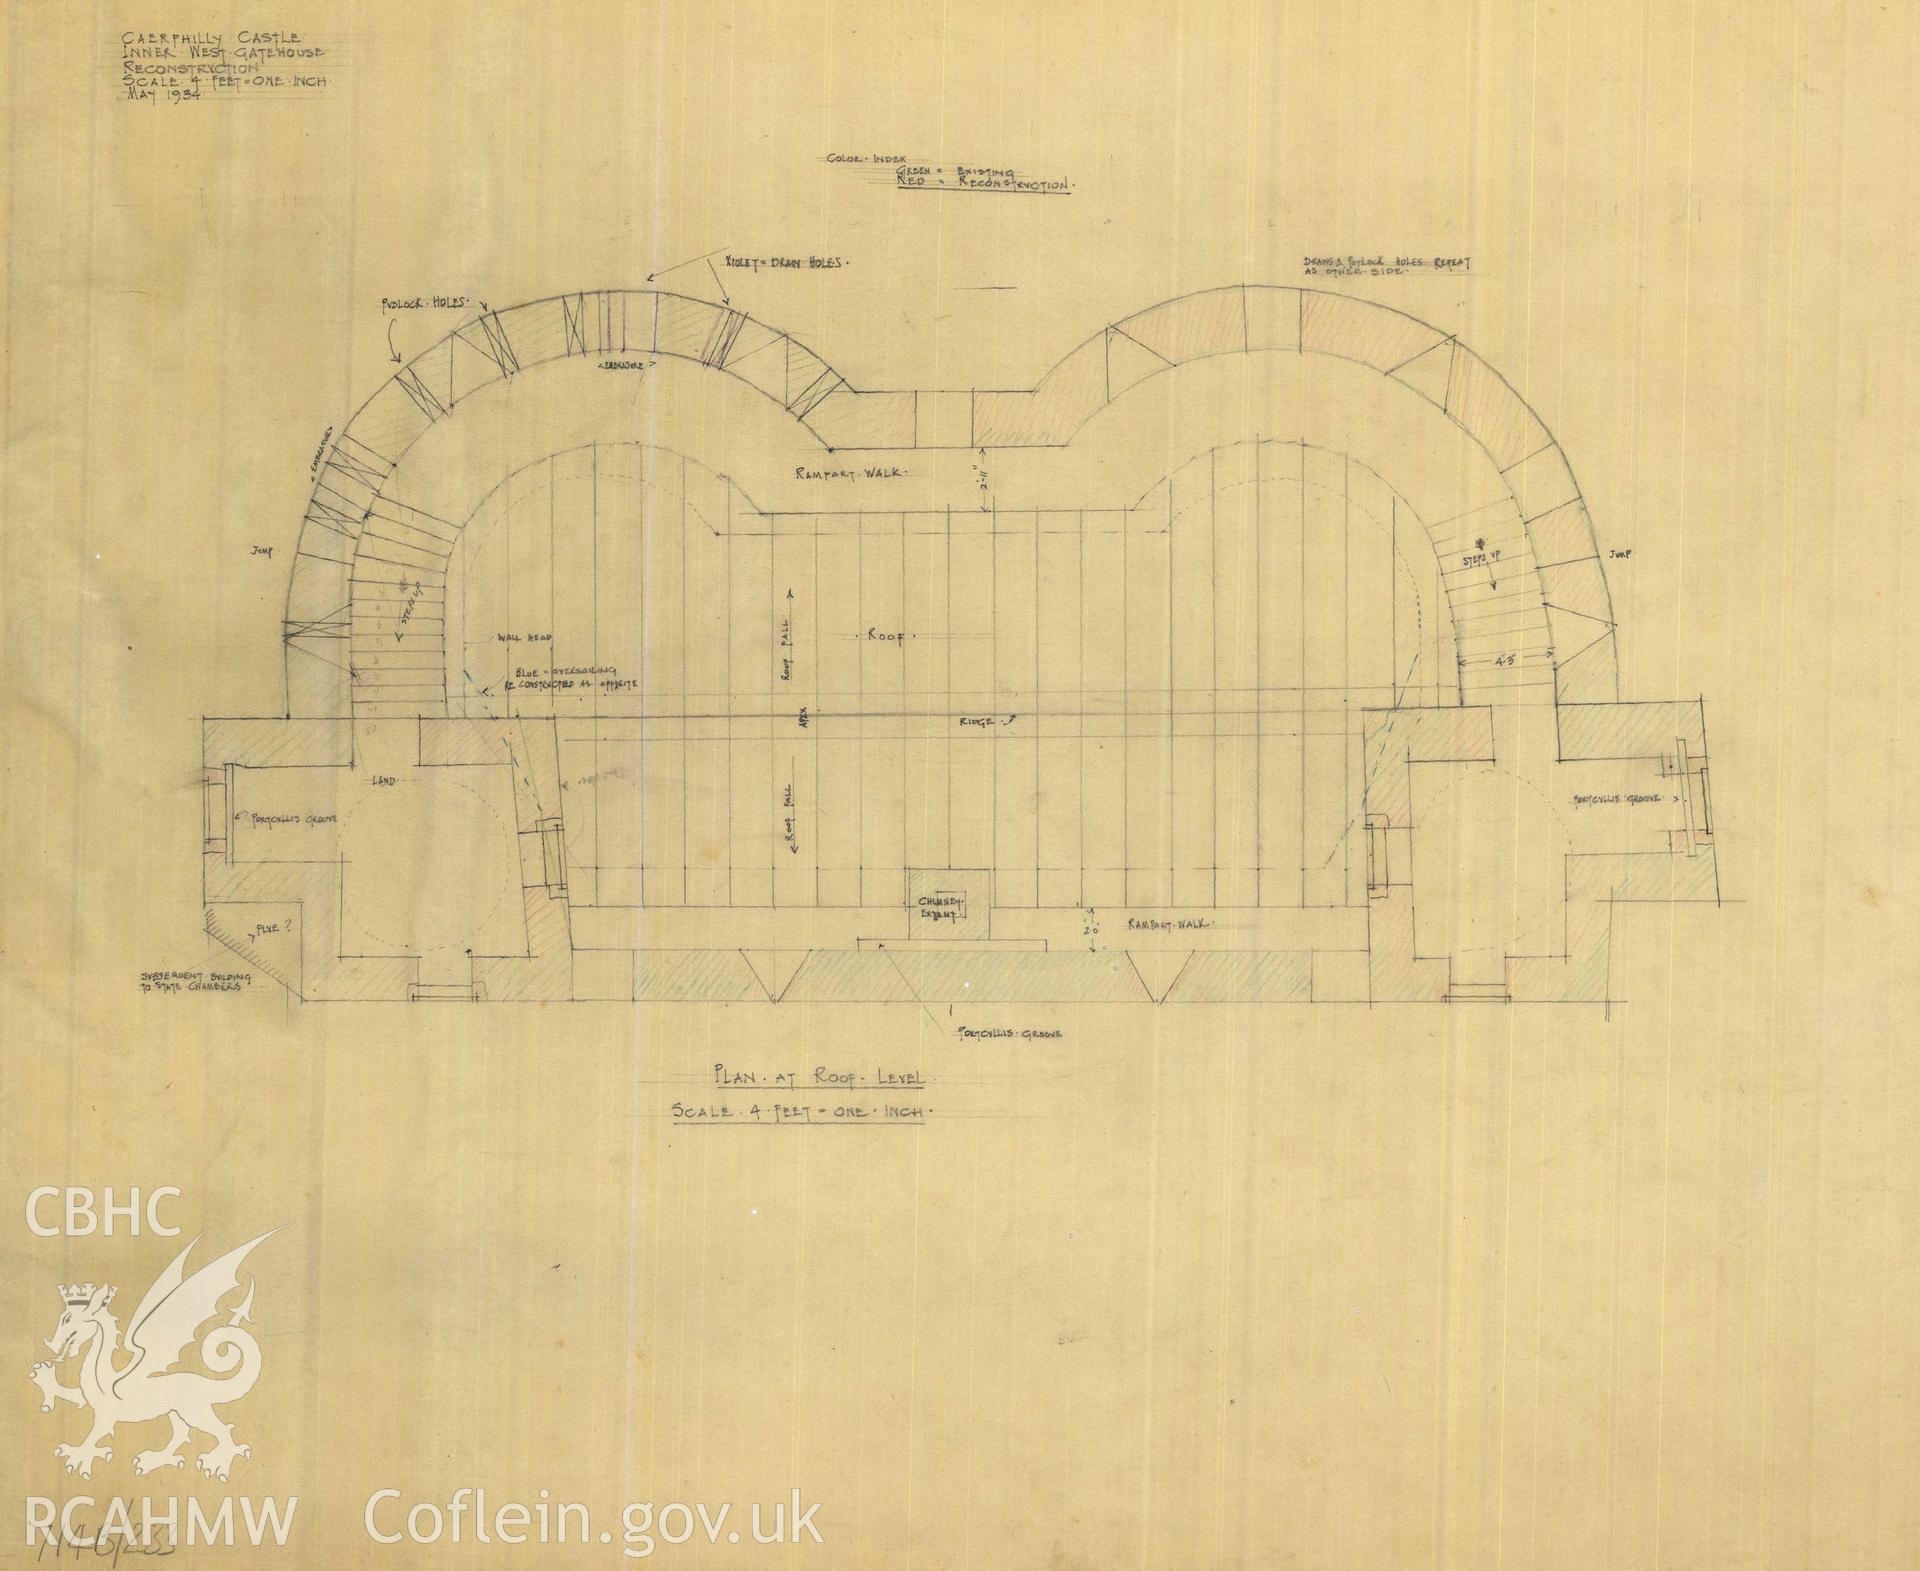 Cadw guardianship monument drawing of Caerphilly Castle. Inner W gate, parapet+roof lead. Cadw Ref. No:714B/233. Scale 1:48.